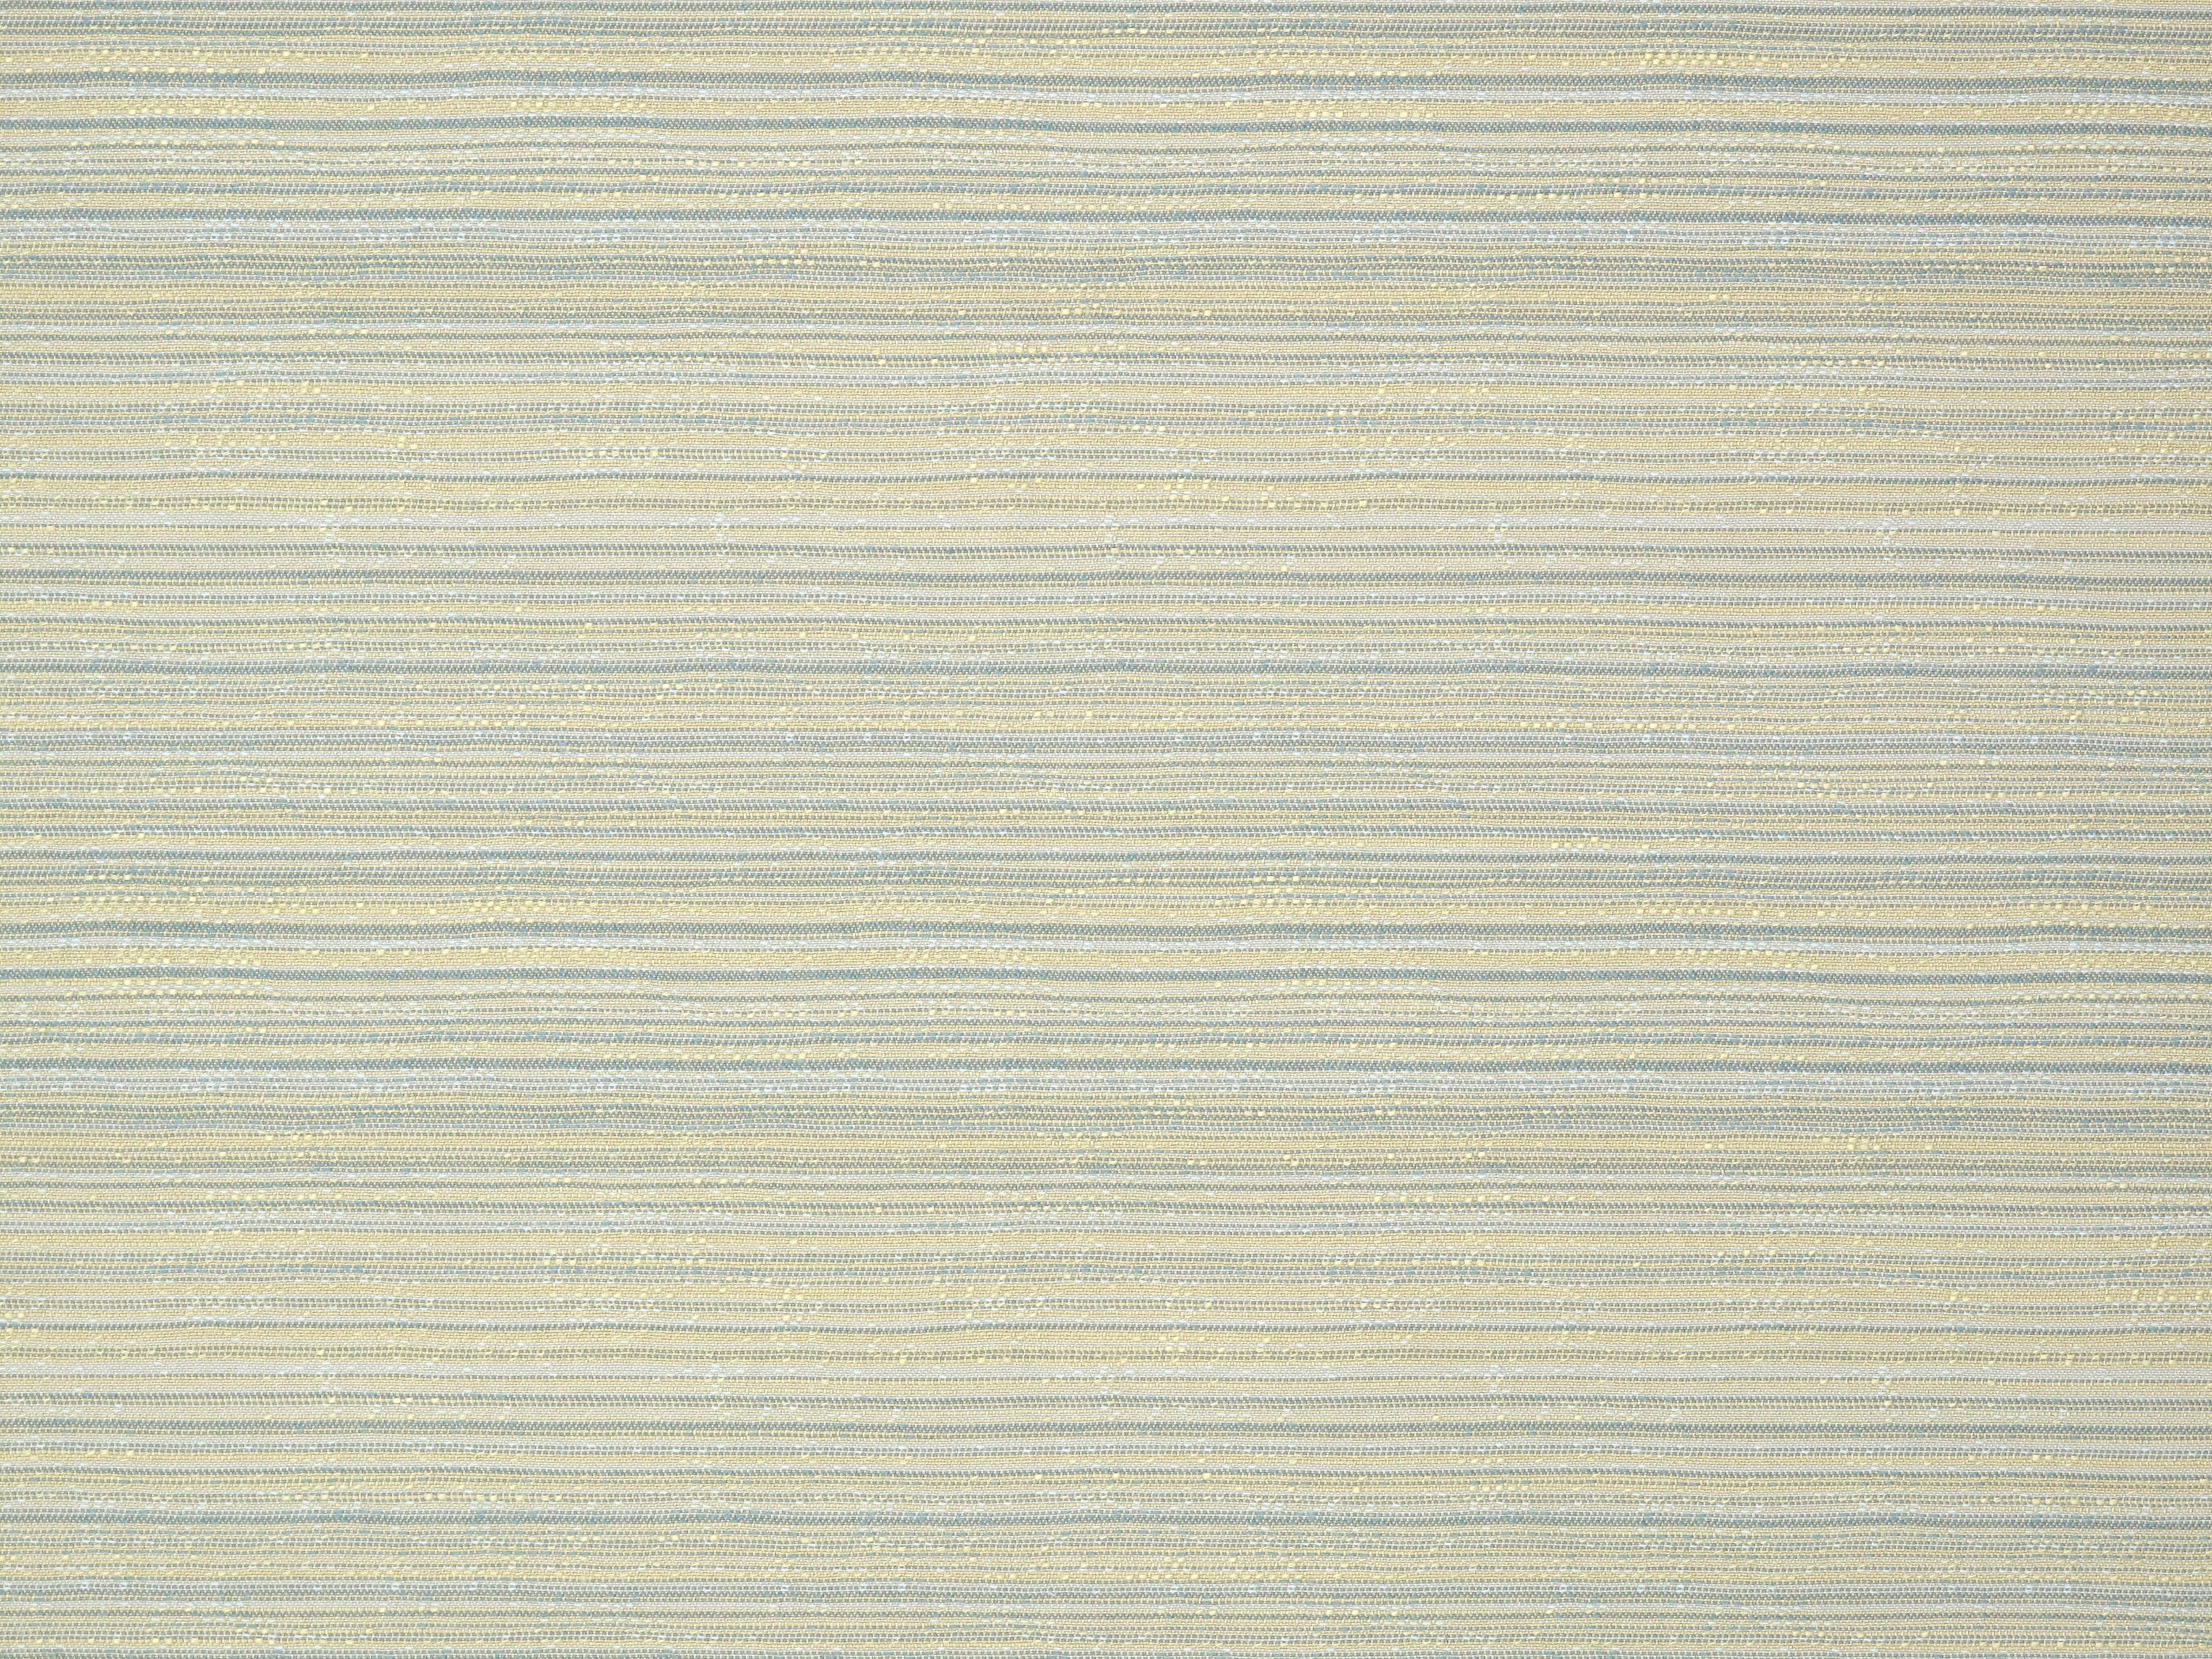 Avalonia fabric in aqua color - pattern number WC 0006U193 - by Scalamandre in the Old World Weavers collection